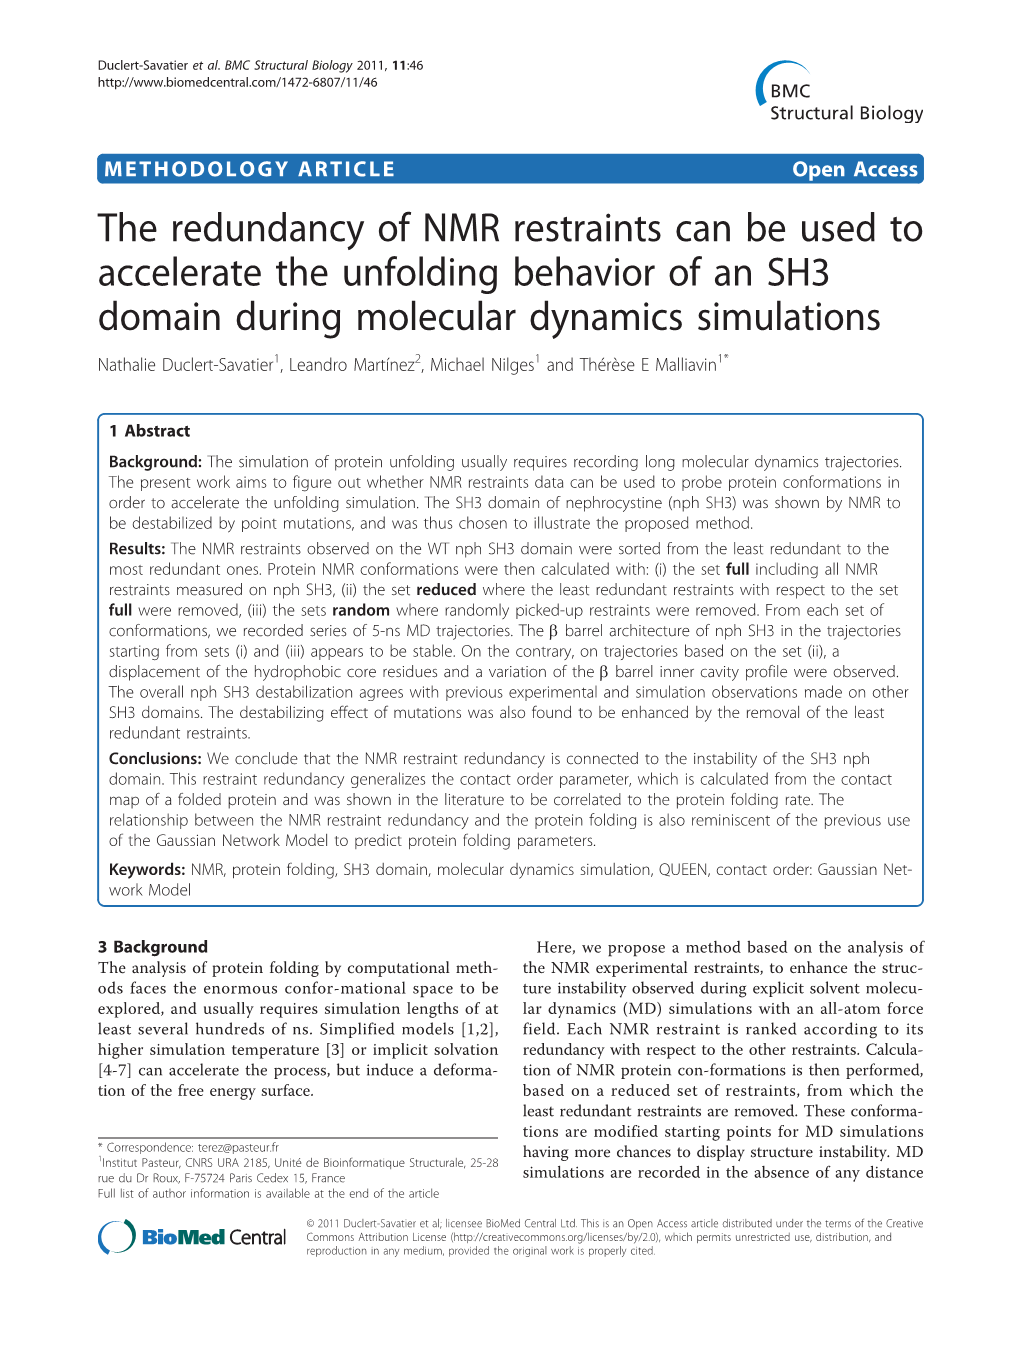 The Redundancy of NMR Restraints Can Be Used to Accelerate The